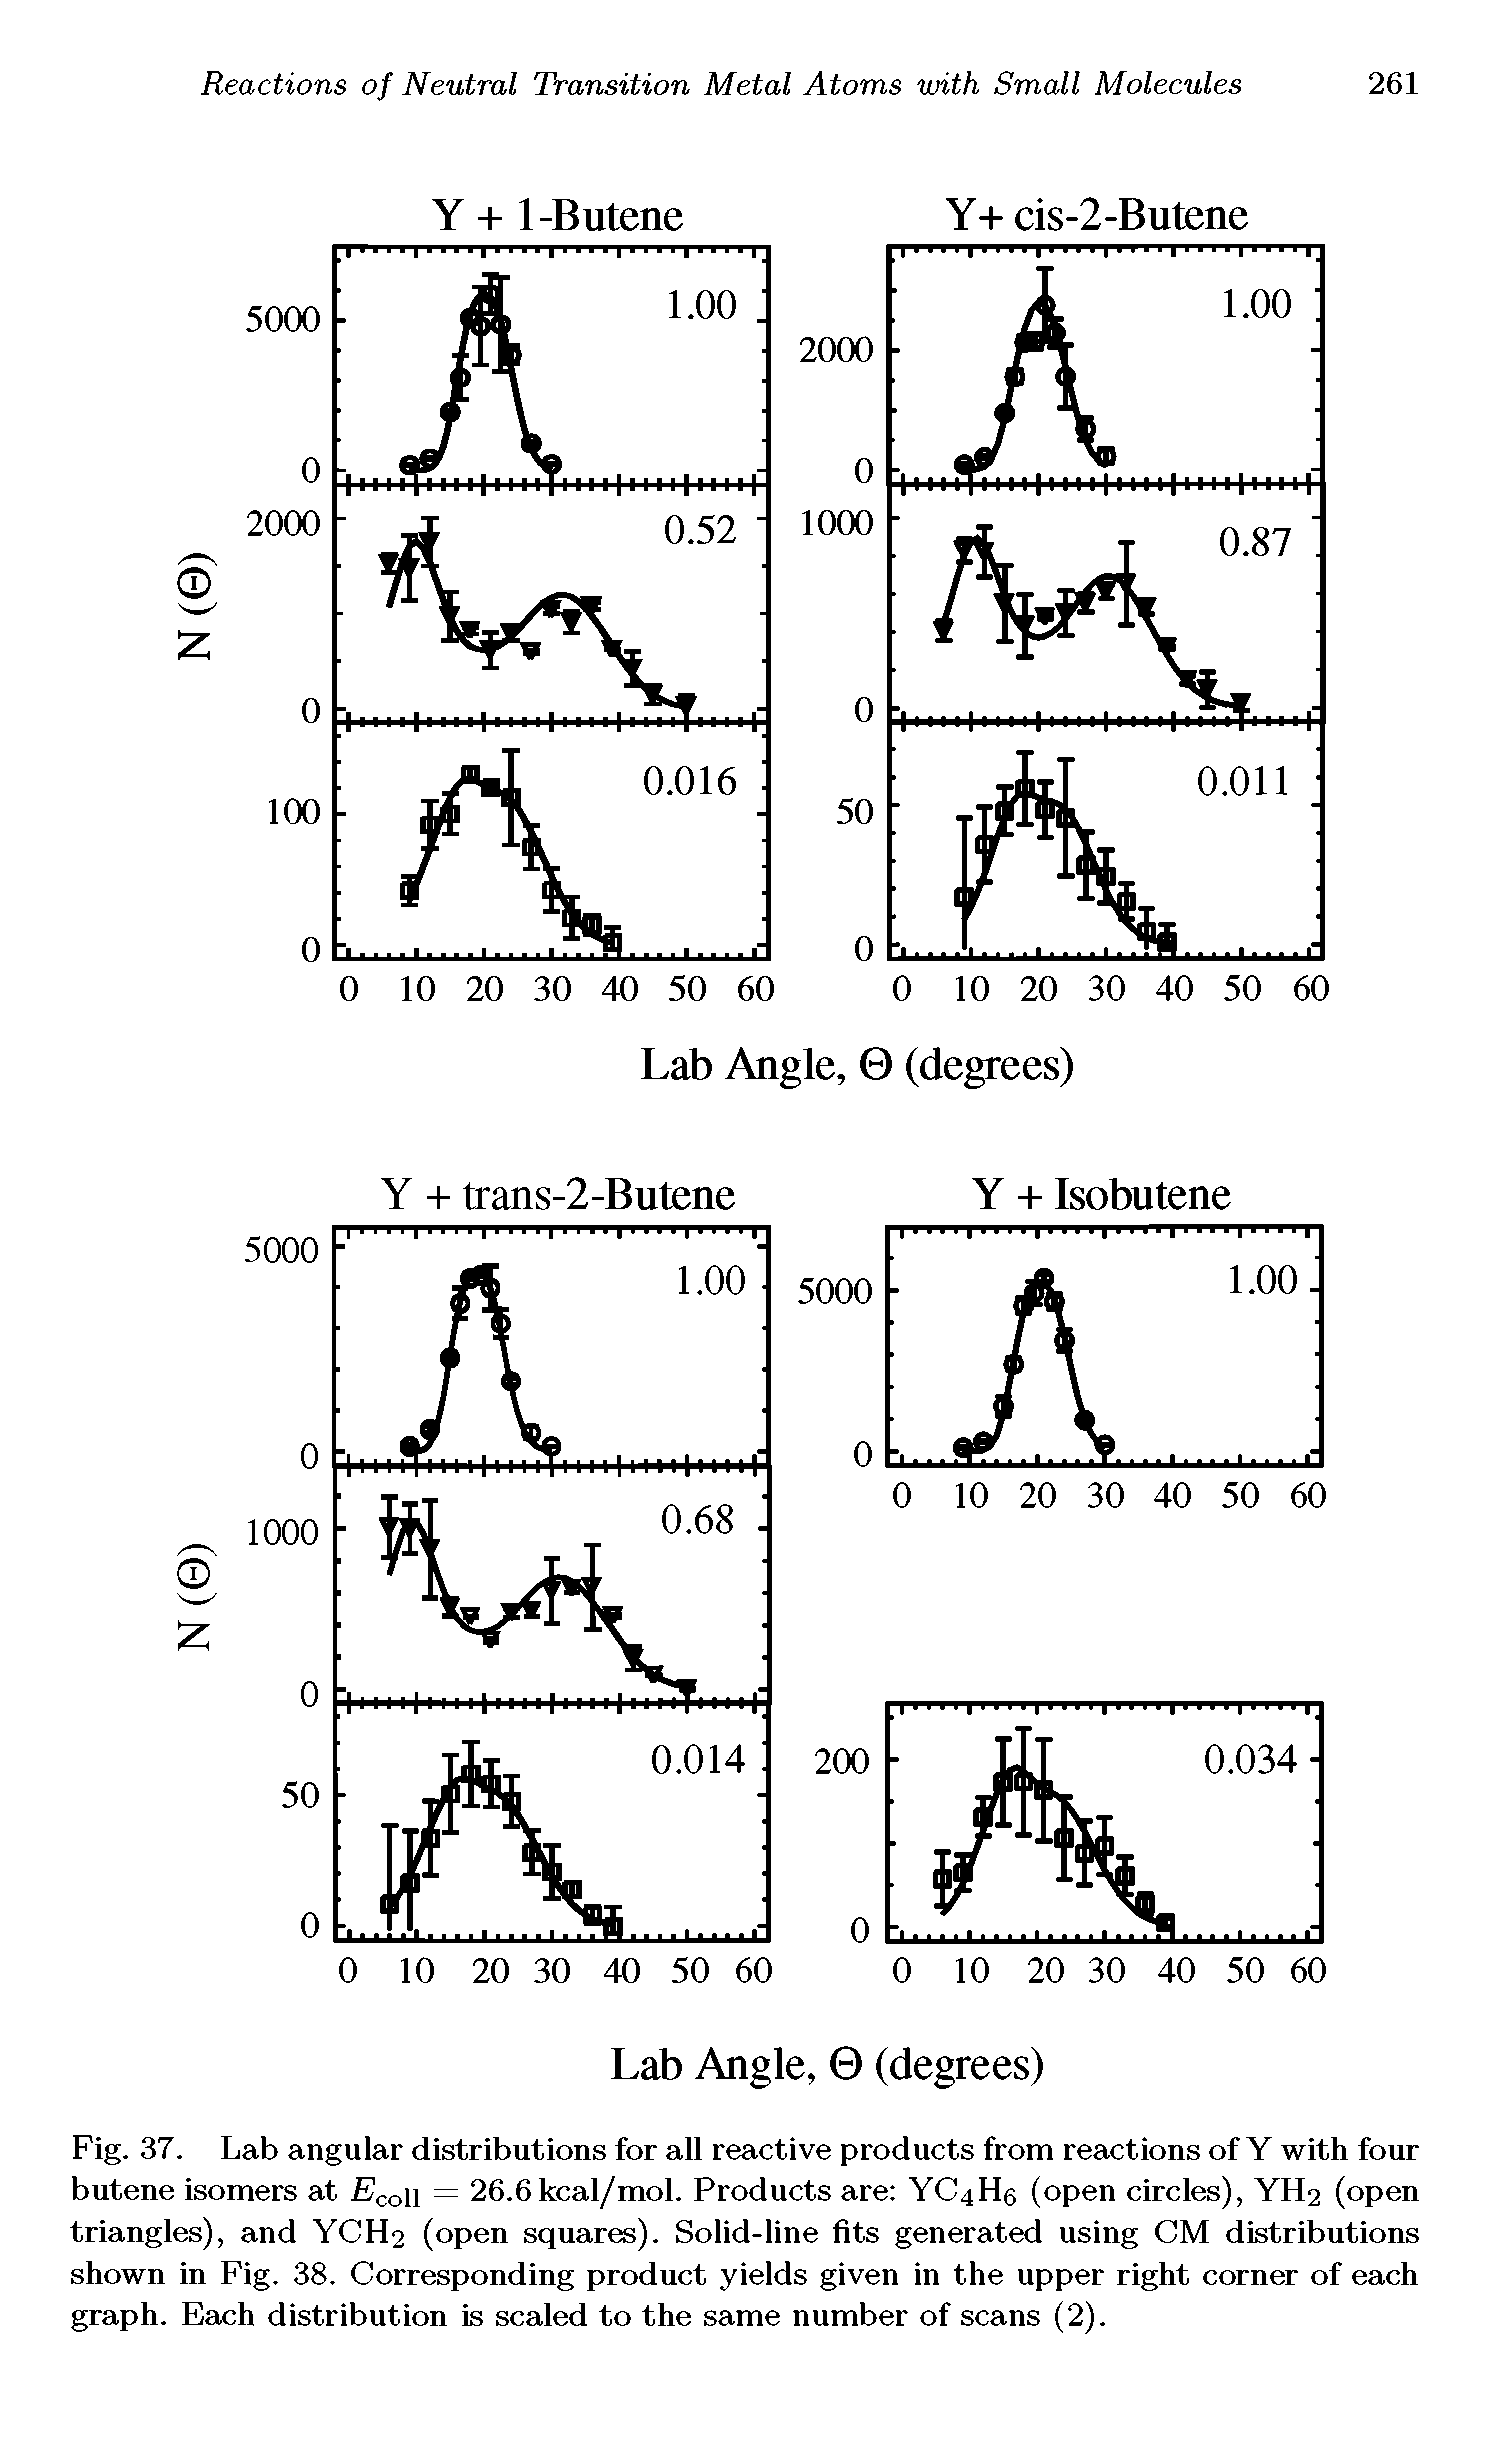 Fig. 37. Lab angular distributions for all reactive products from reactions of Y with four butene isomers at con = 26.6 kcal/mol. Products are YC4H6 (open circles), YH2 (open triangles), and YCH2 (open squares). Solid-line fits generated using CM distributions shown in Fig. 38. Corresponding product yields given in the upper right corner of each graph. Each distribution is scaled to the same number of scans (2).